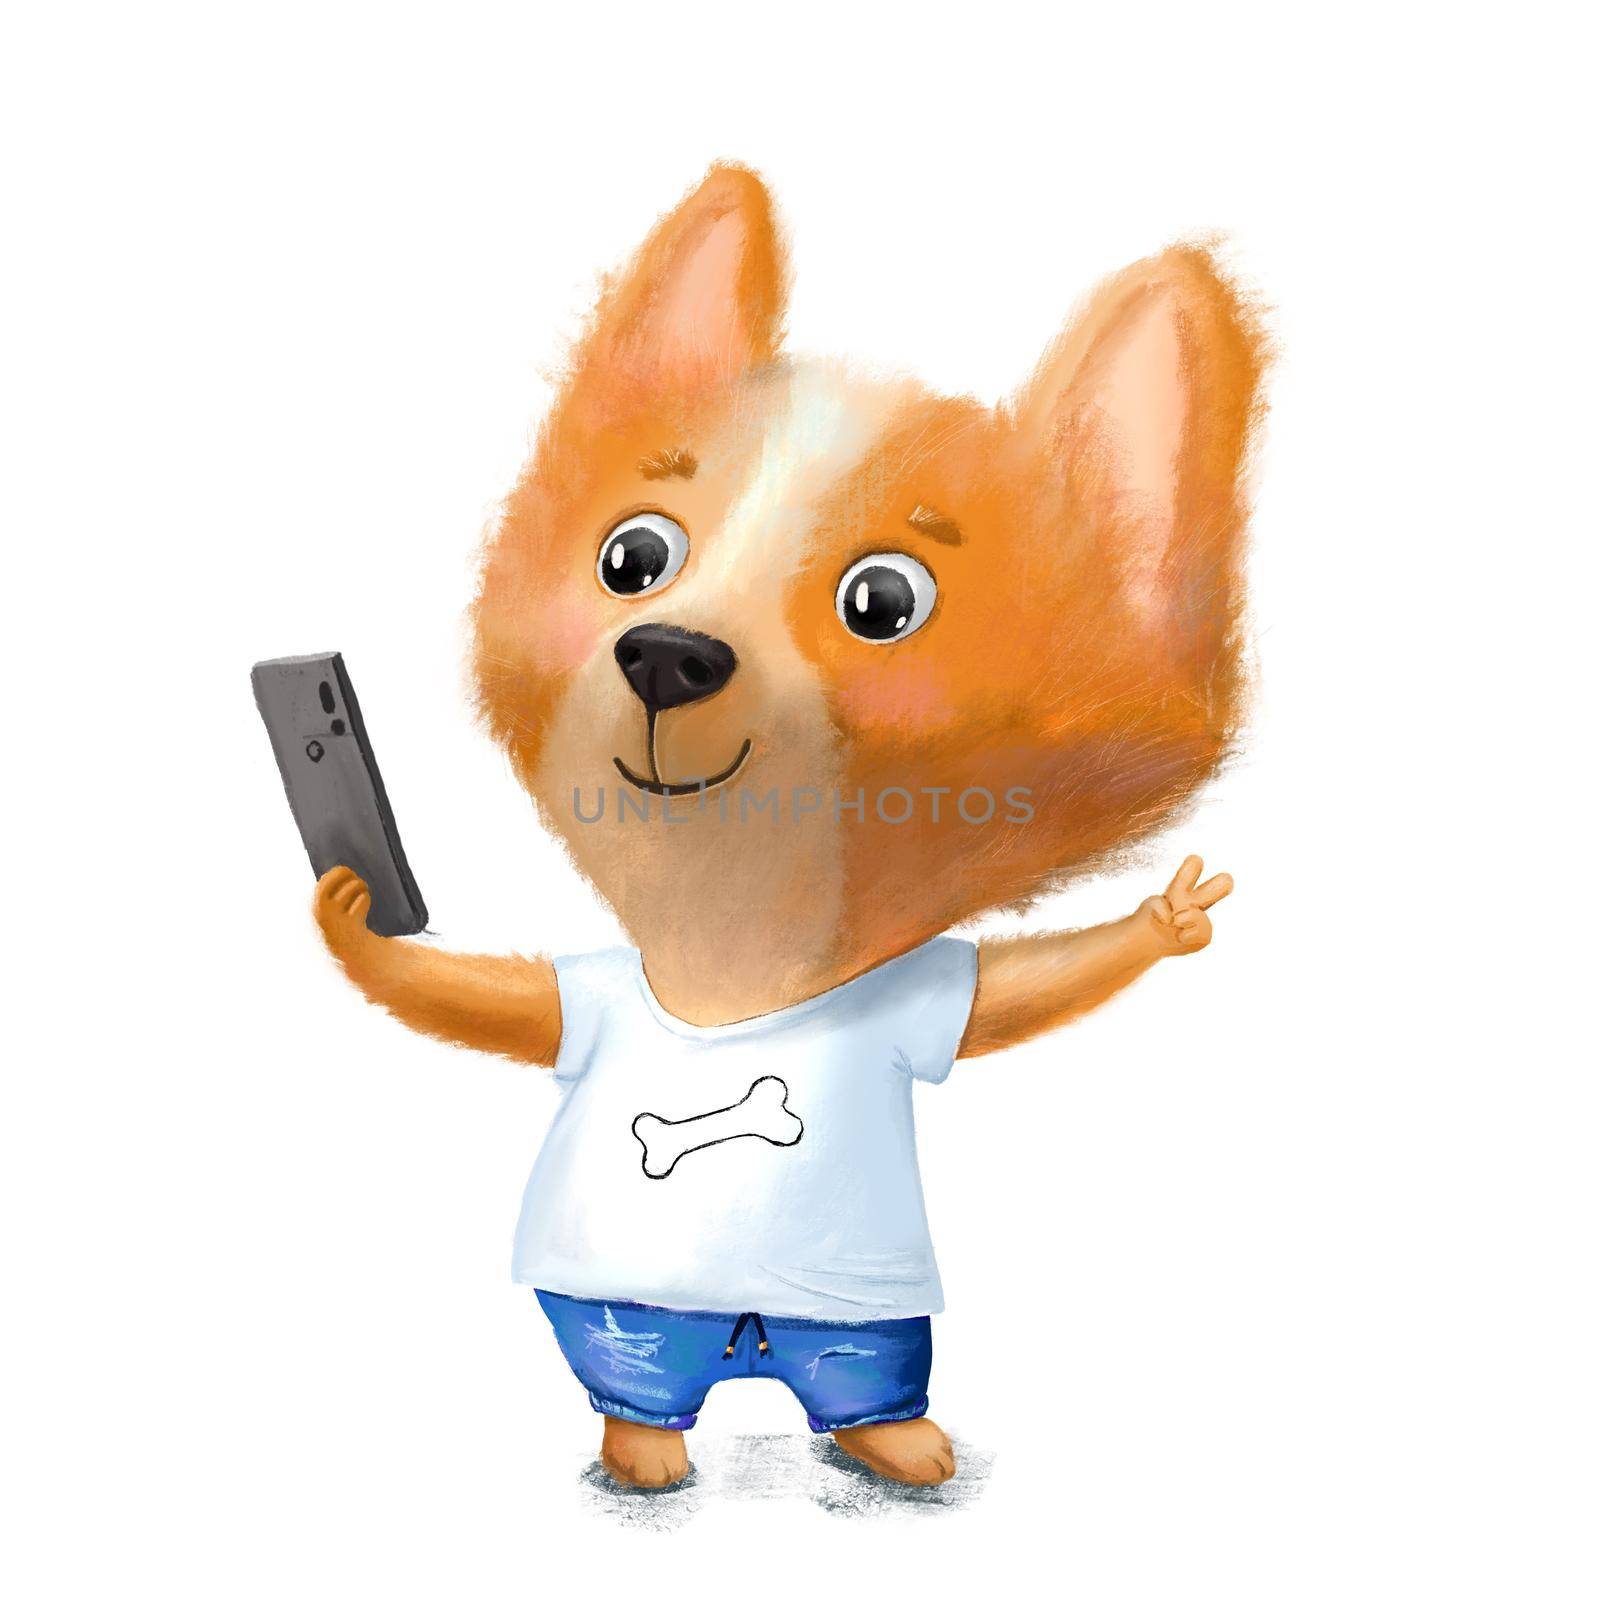 Cute dog corgi taking selfie. Animal character puppy in jeans and T-shirt with phone in hand. Hand drawn illustration isolated on white by ElenaPlatova